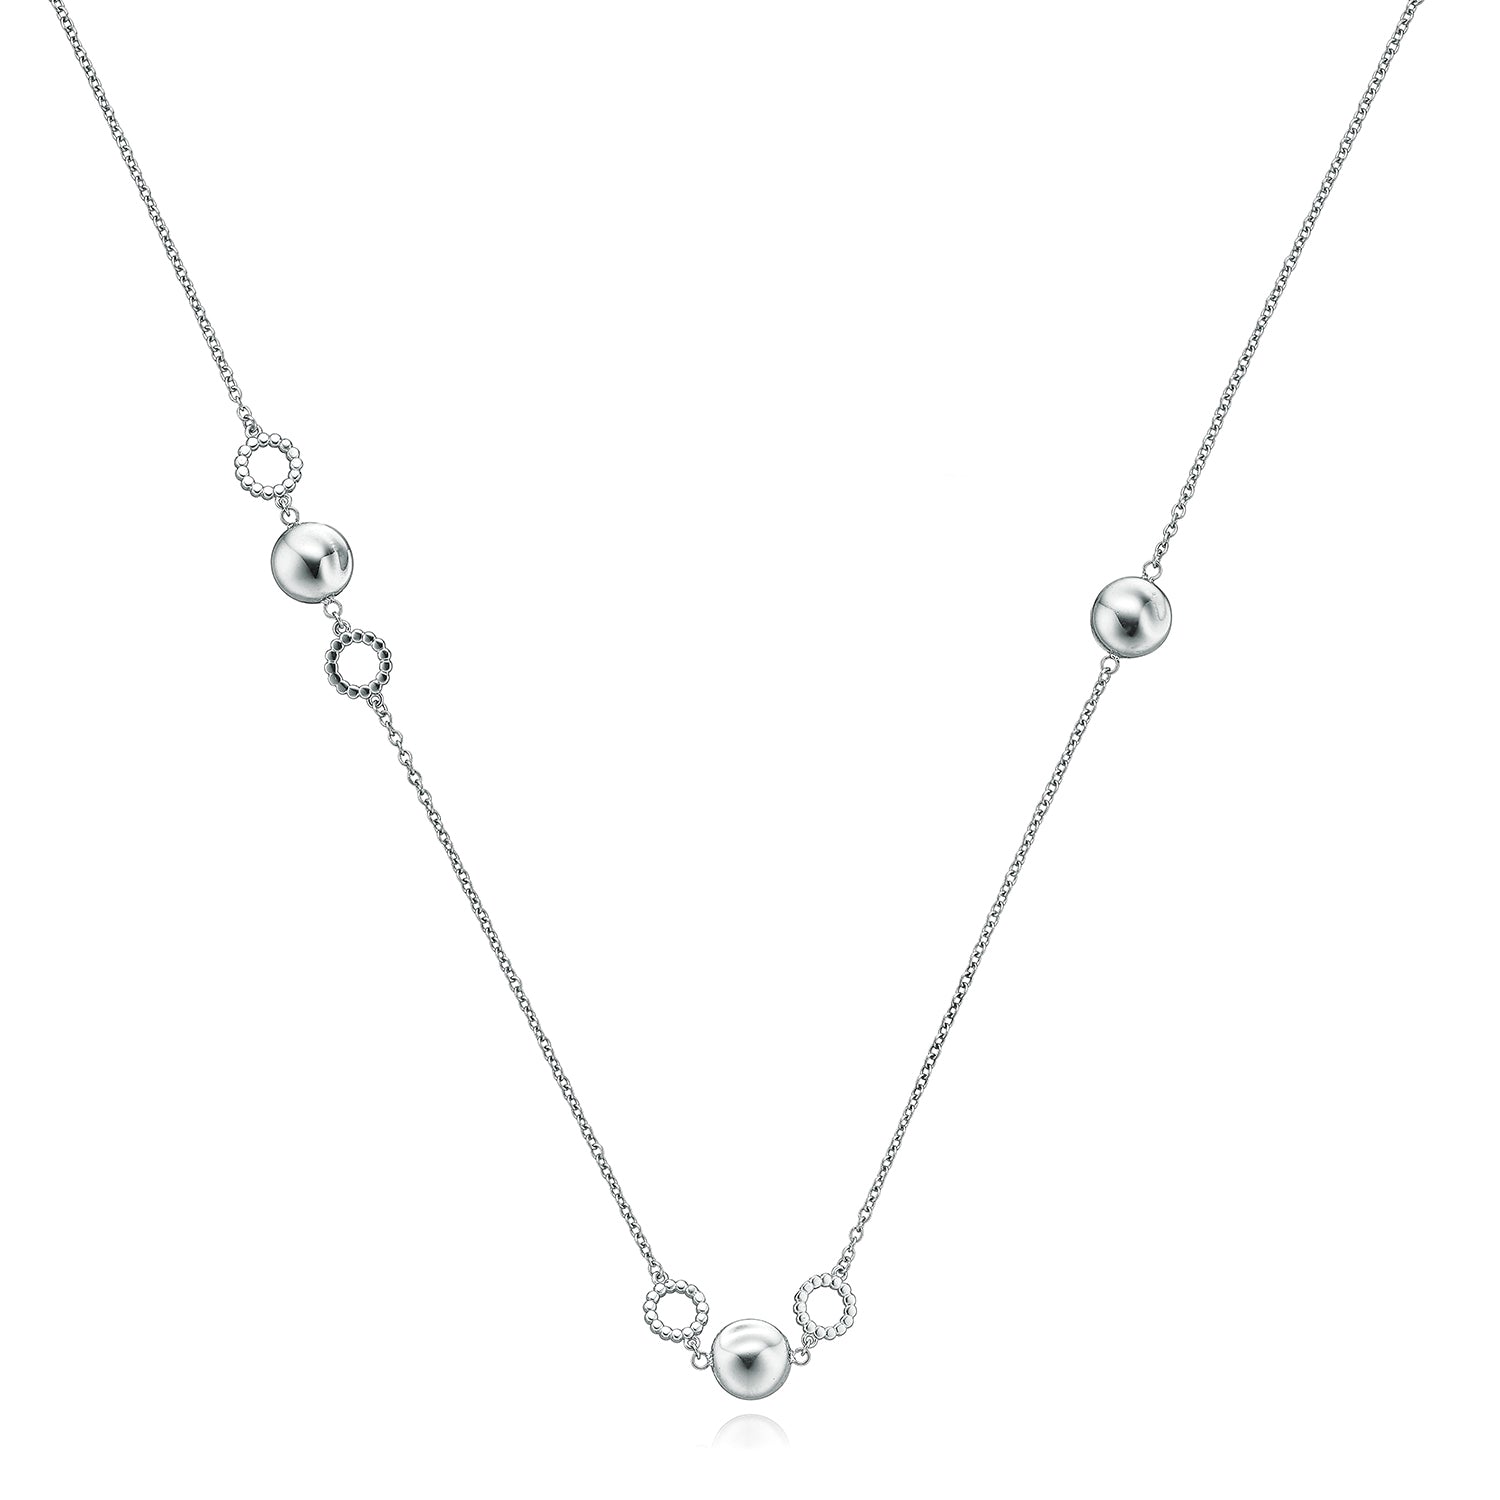 Hand Crafted Sterling Silver Station Necklace - Blue Regal | NOVICA